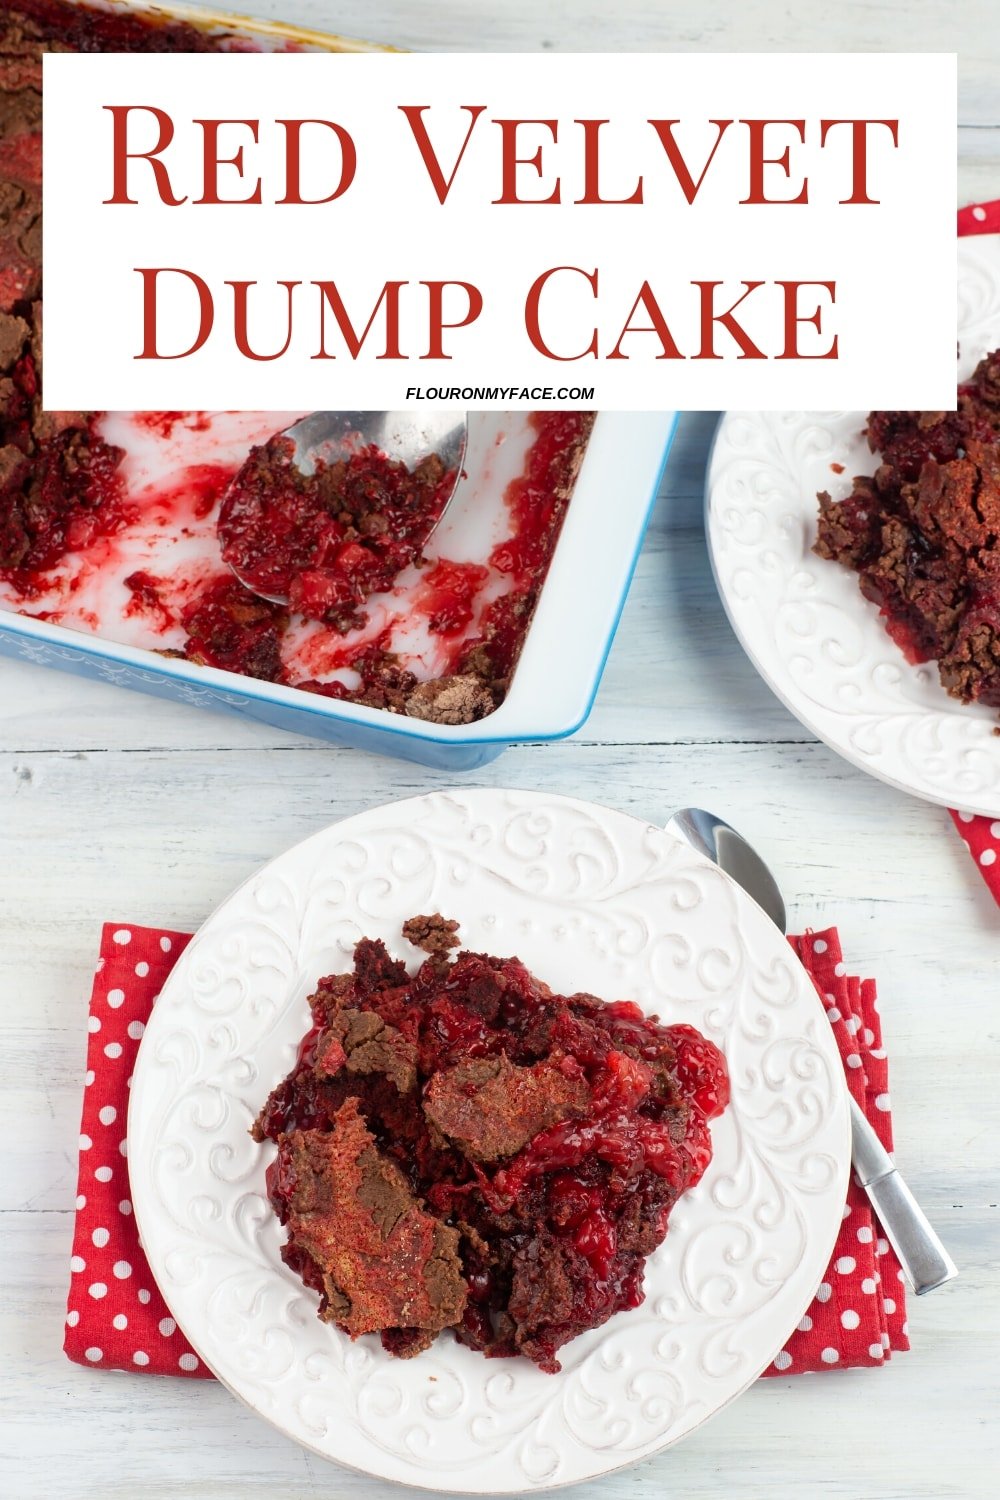 a serving of Red Velvet Dump Cake recipe on a white dessert plate with a red and white polka dot cloth napkin. The baking dish visible in the background.